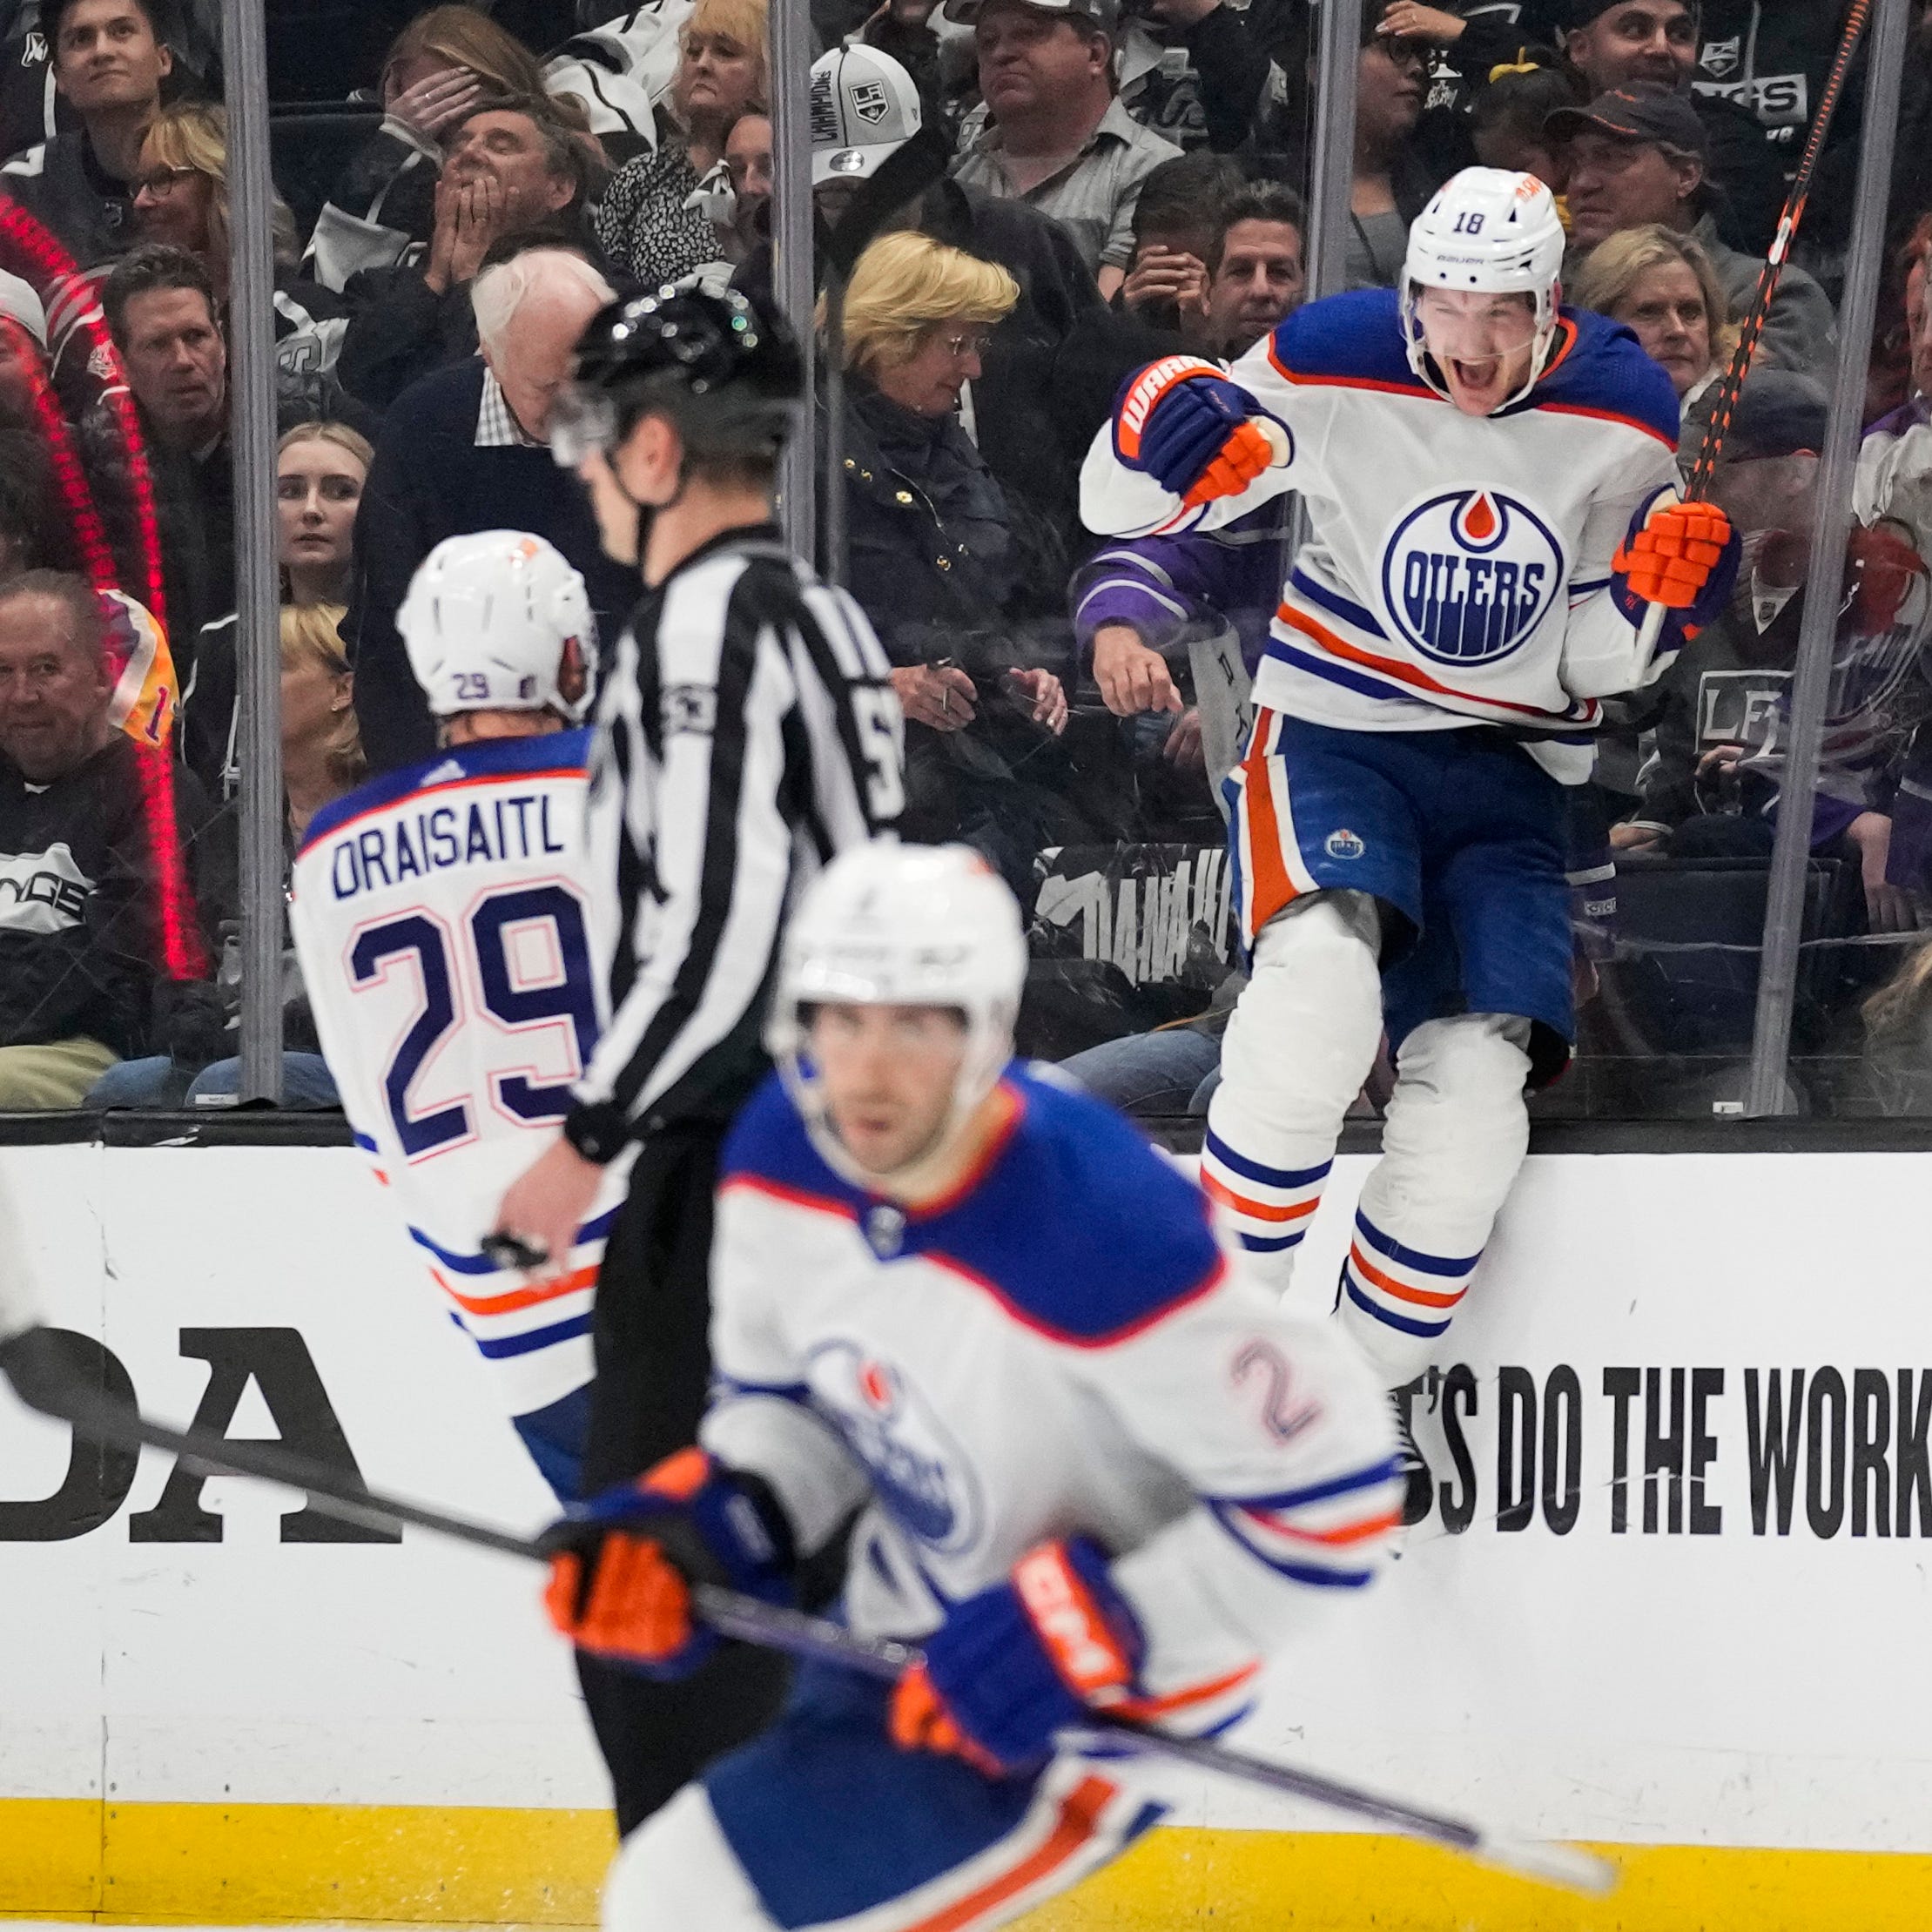 The Edmonton Oilers' Zach Hyman celebrates with Leon Draisaitl (29) after scoring during overtime against the Los Angeles Kings.